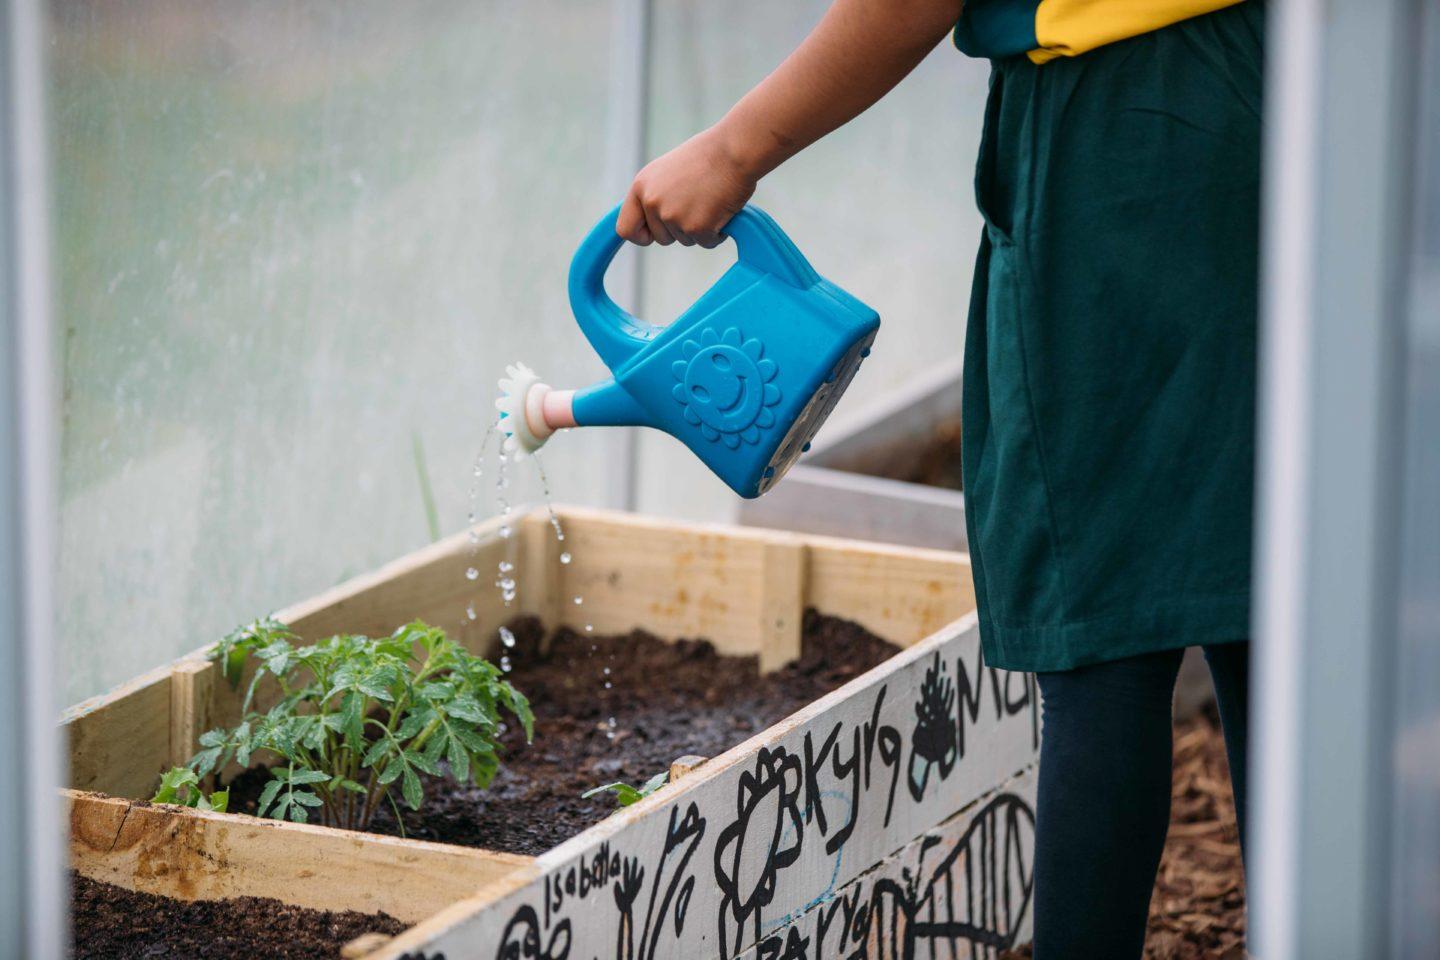 A student is watering a plant in a planter box.